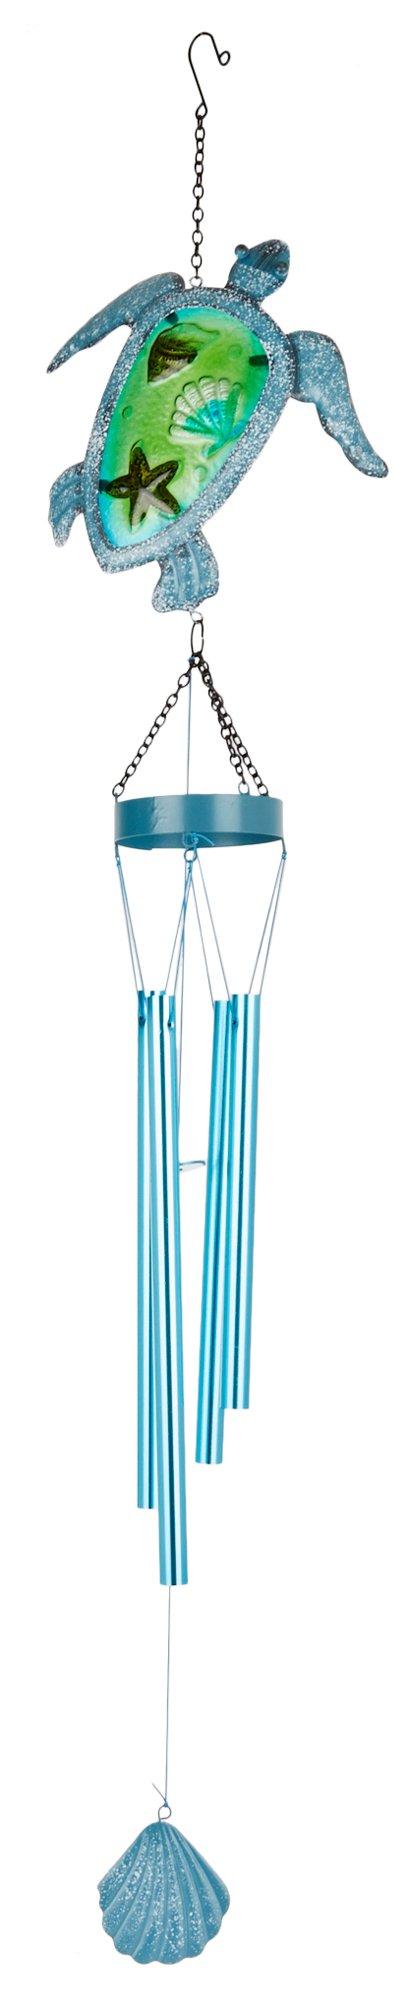 JD Yeatts 36in Sea Turtle Wind Chime